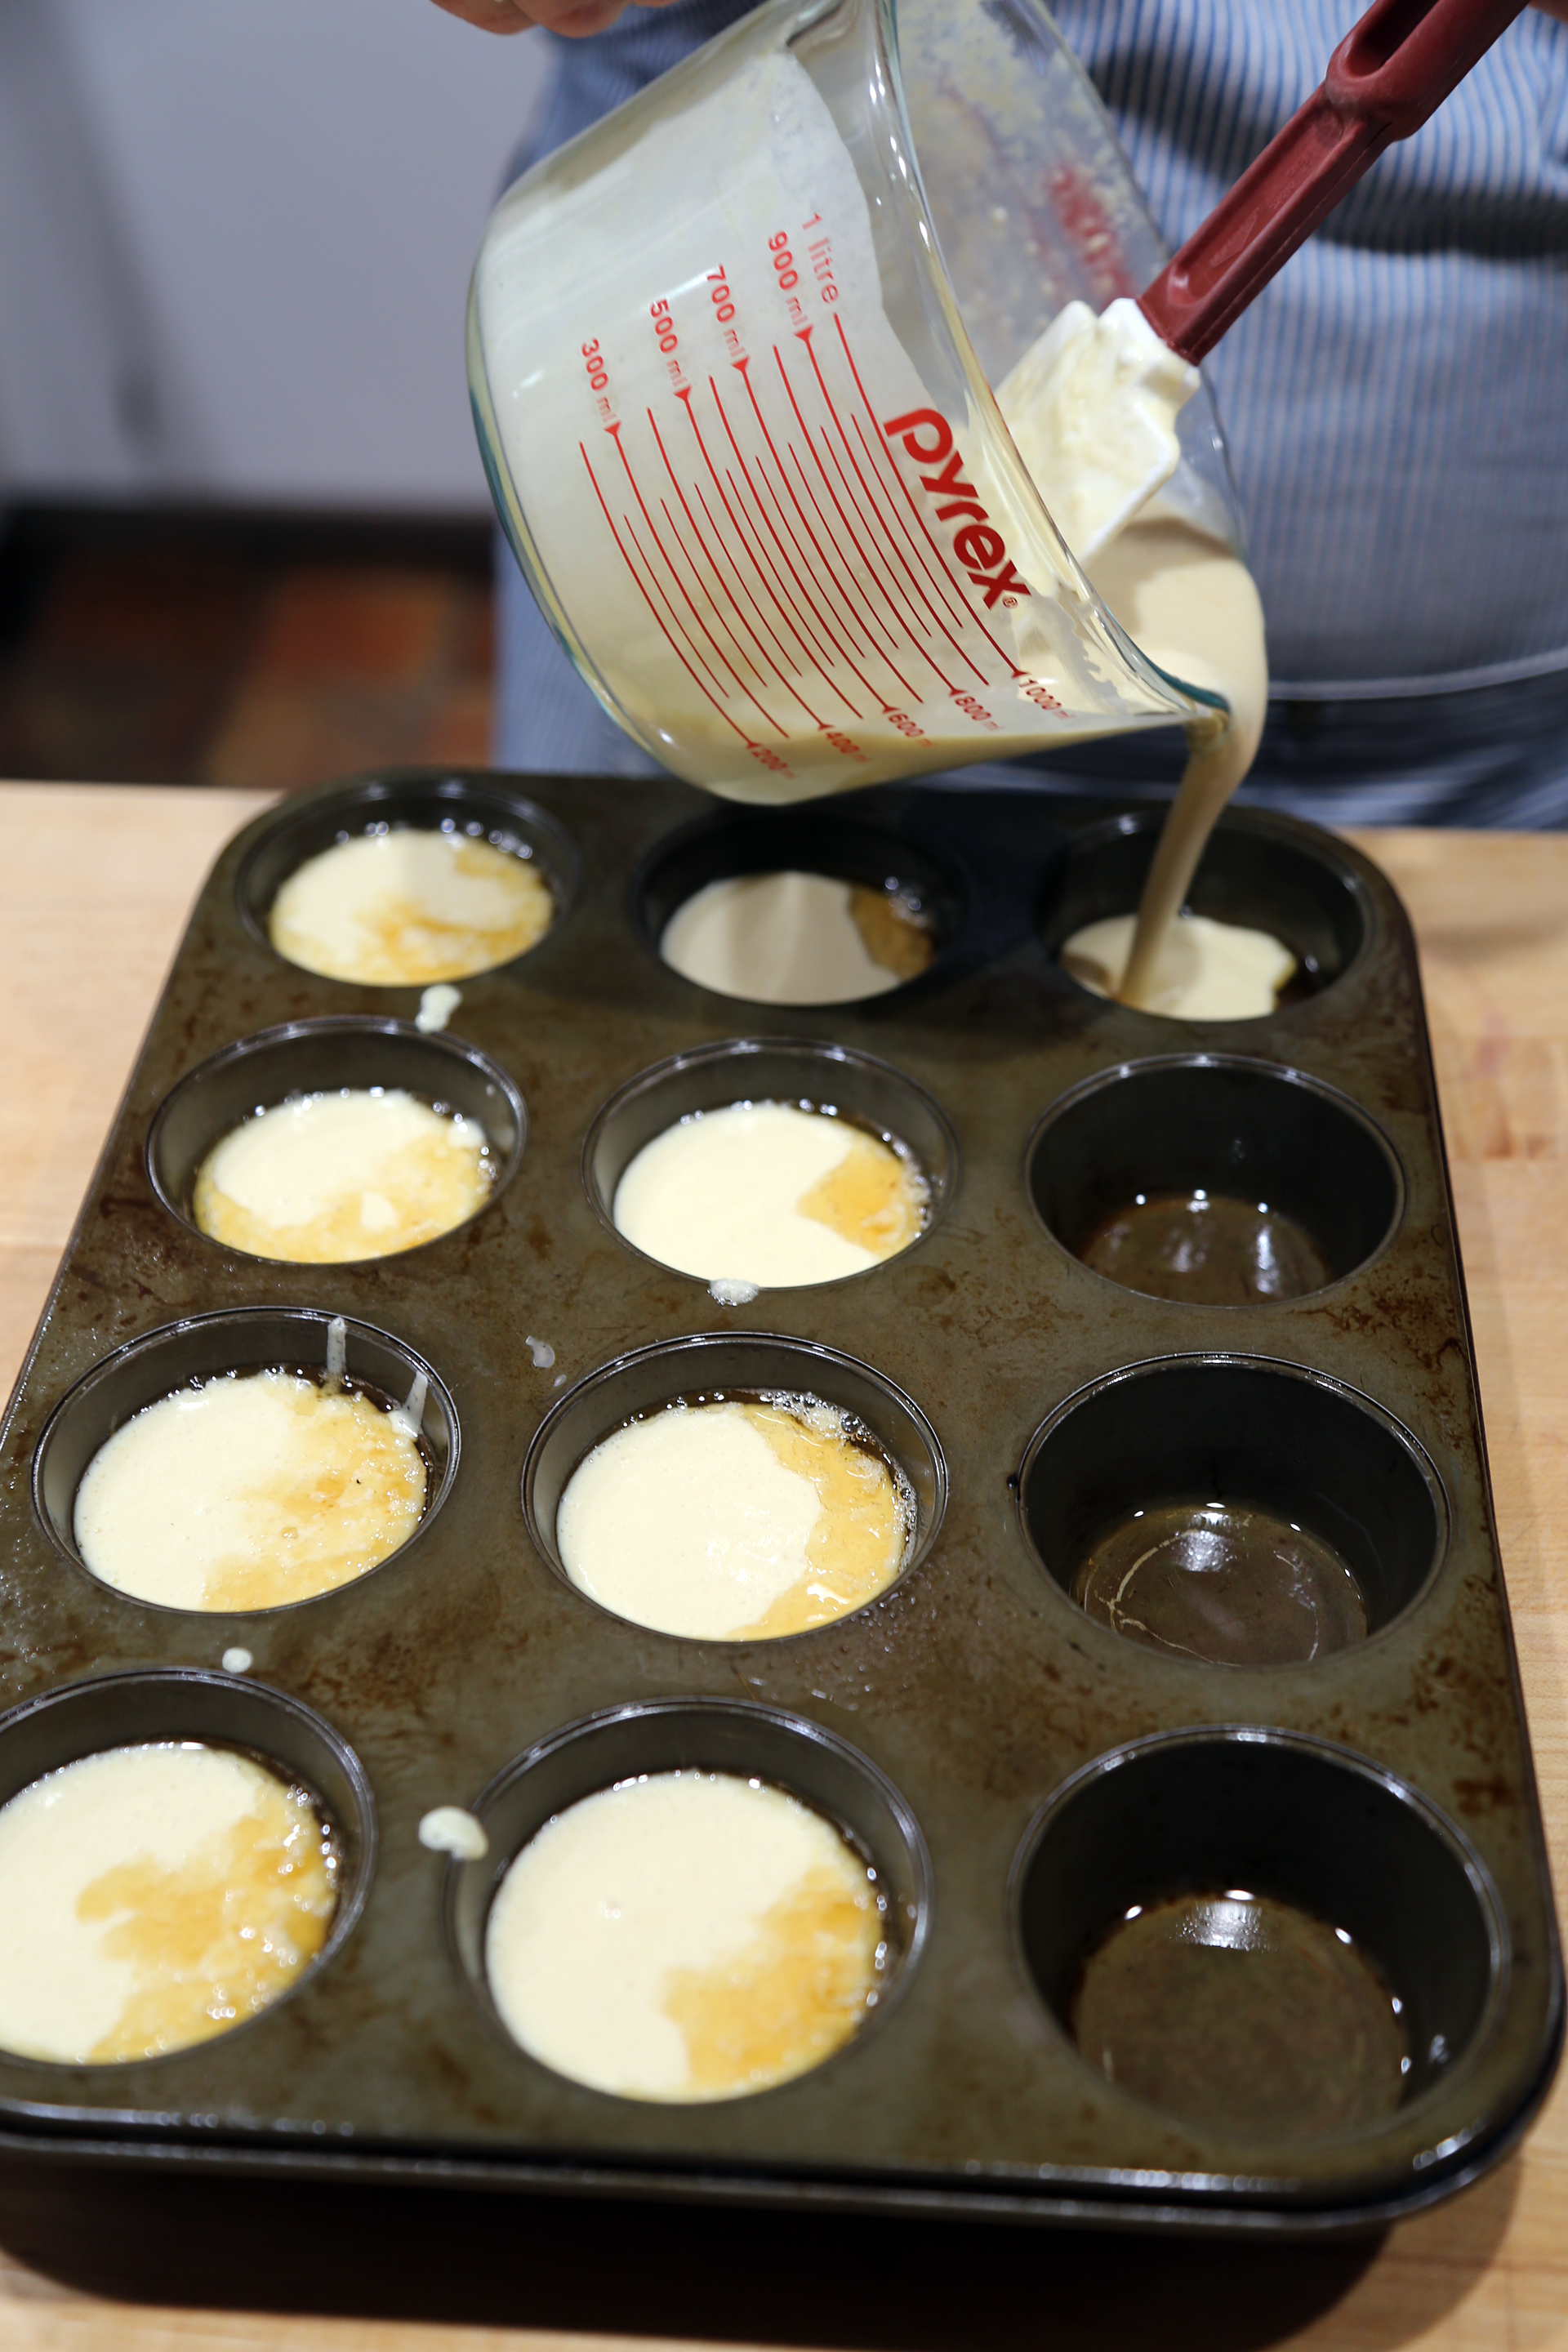 Put the muffin pan with the beef fat into the oven for about 3 or 4 minutes, then remove it and carefully divide the batter between the muffin cups, filling them about 3/4 full.